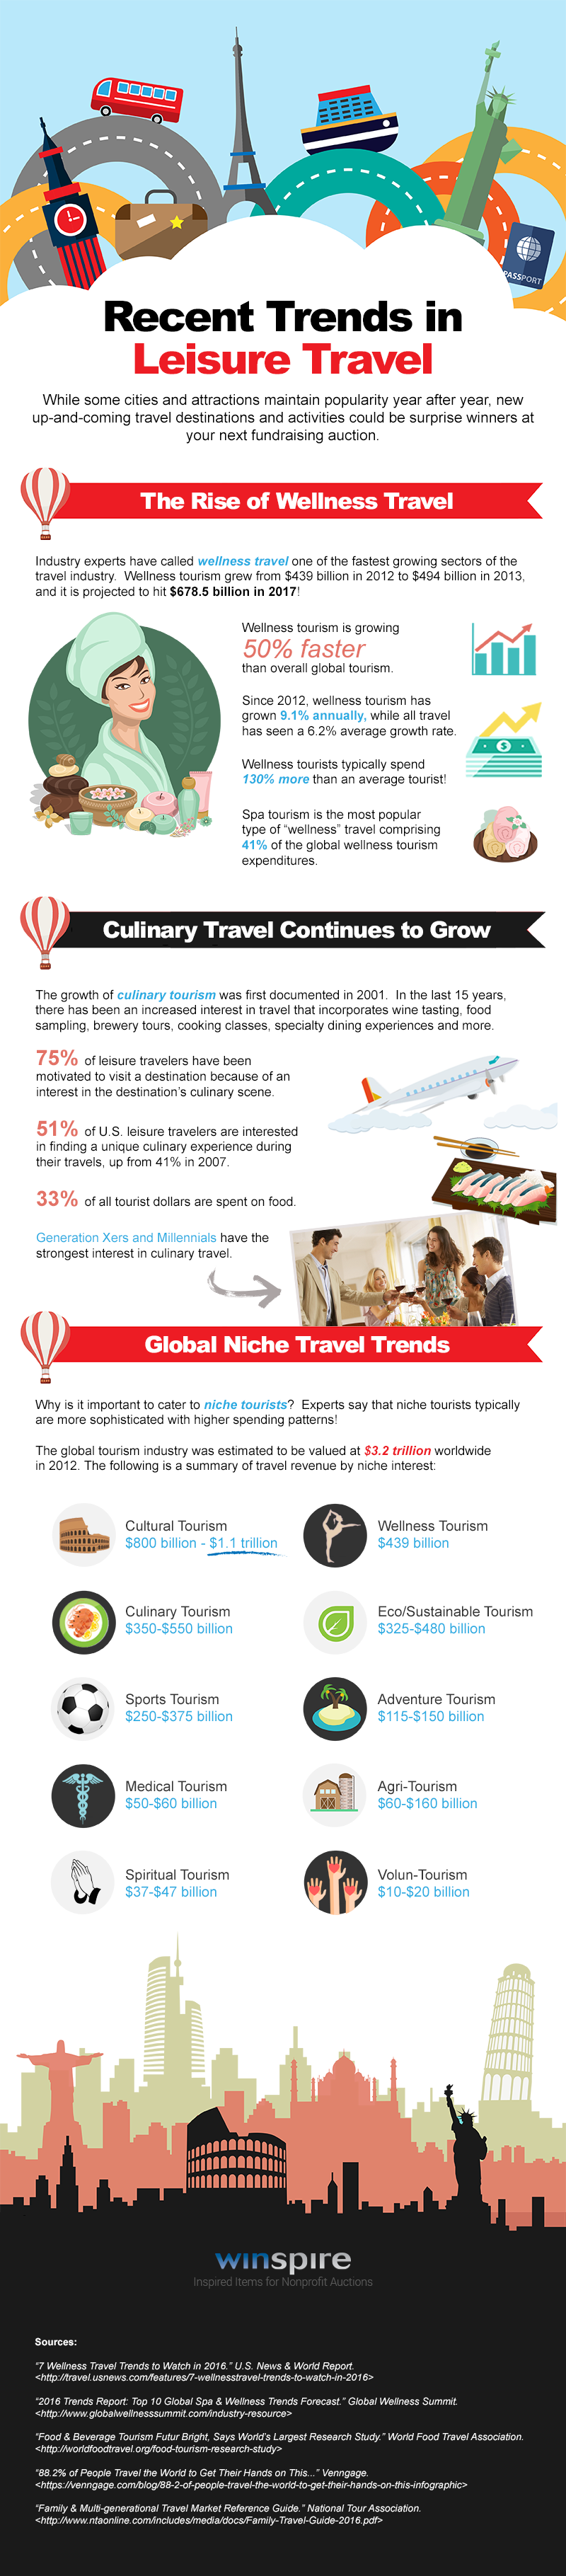 Travel-Trends-infographic.png